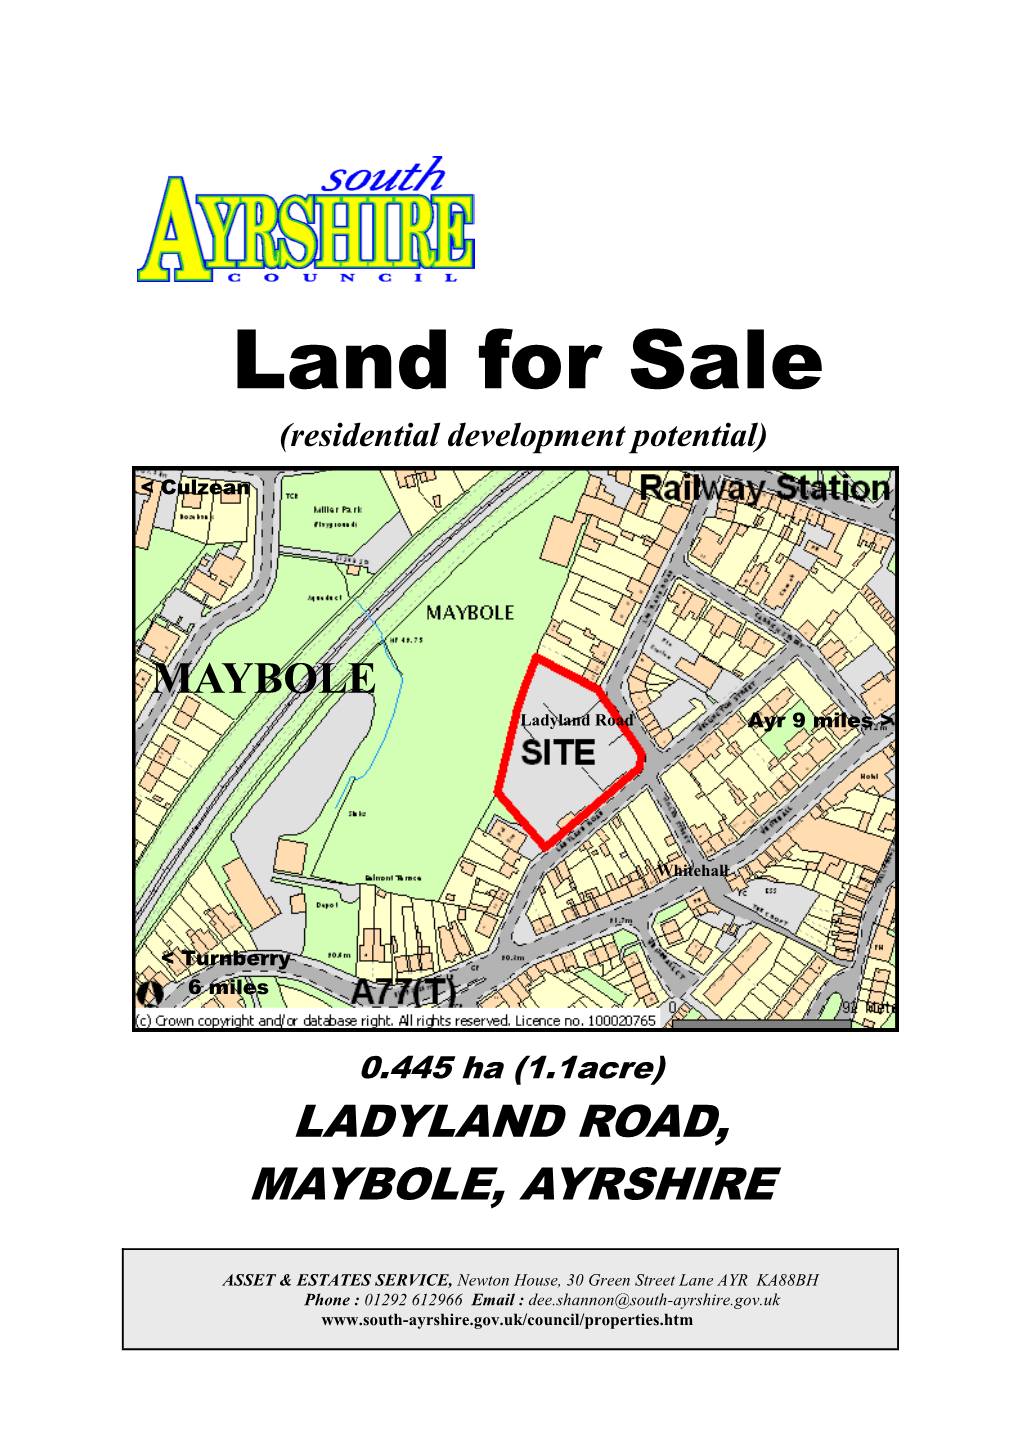 Land for Sale (Residential Development Potential)